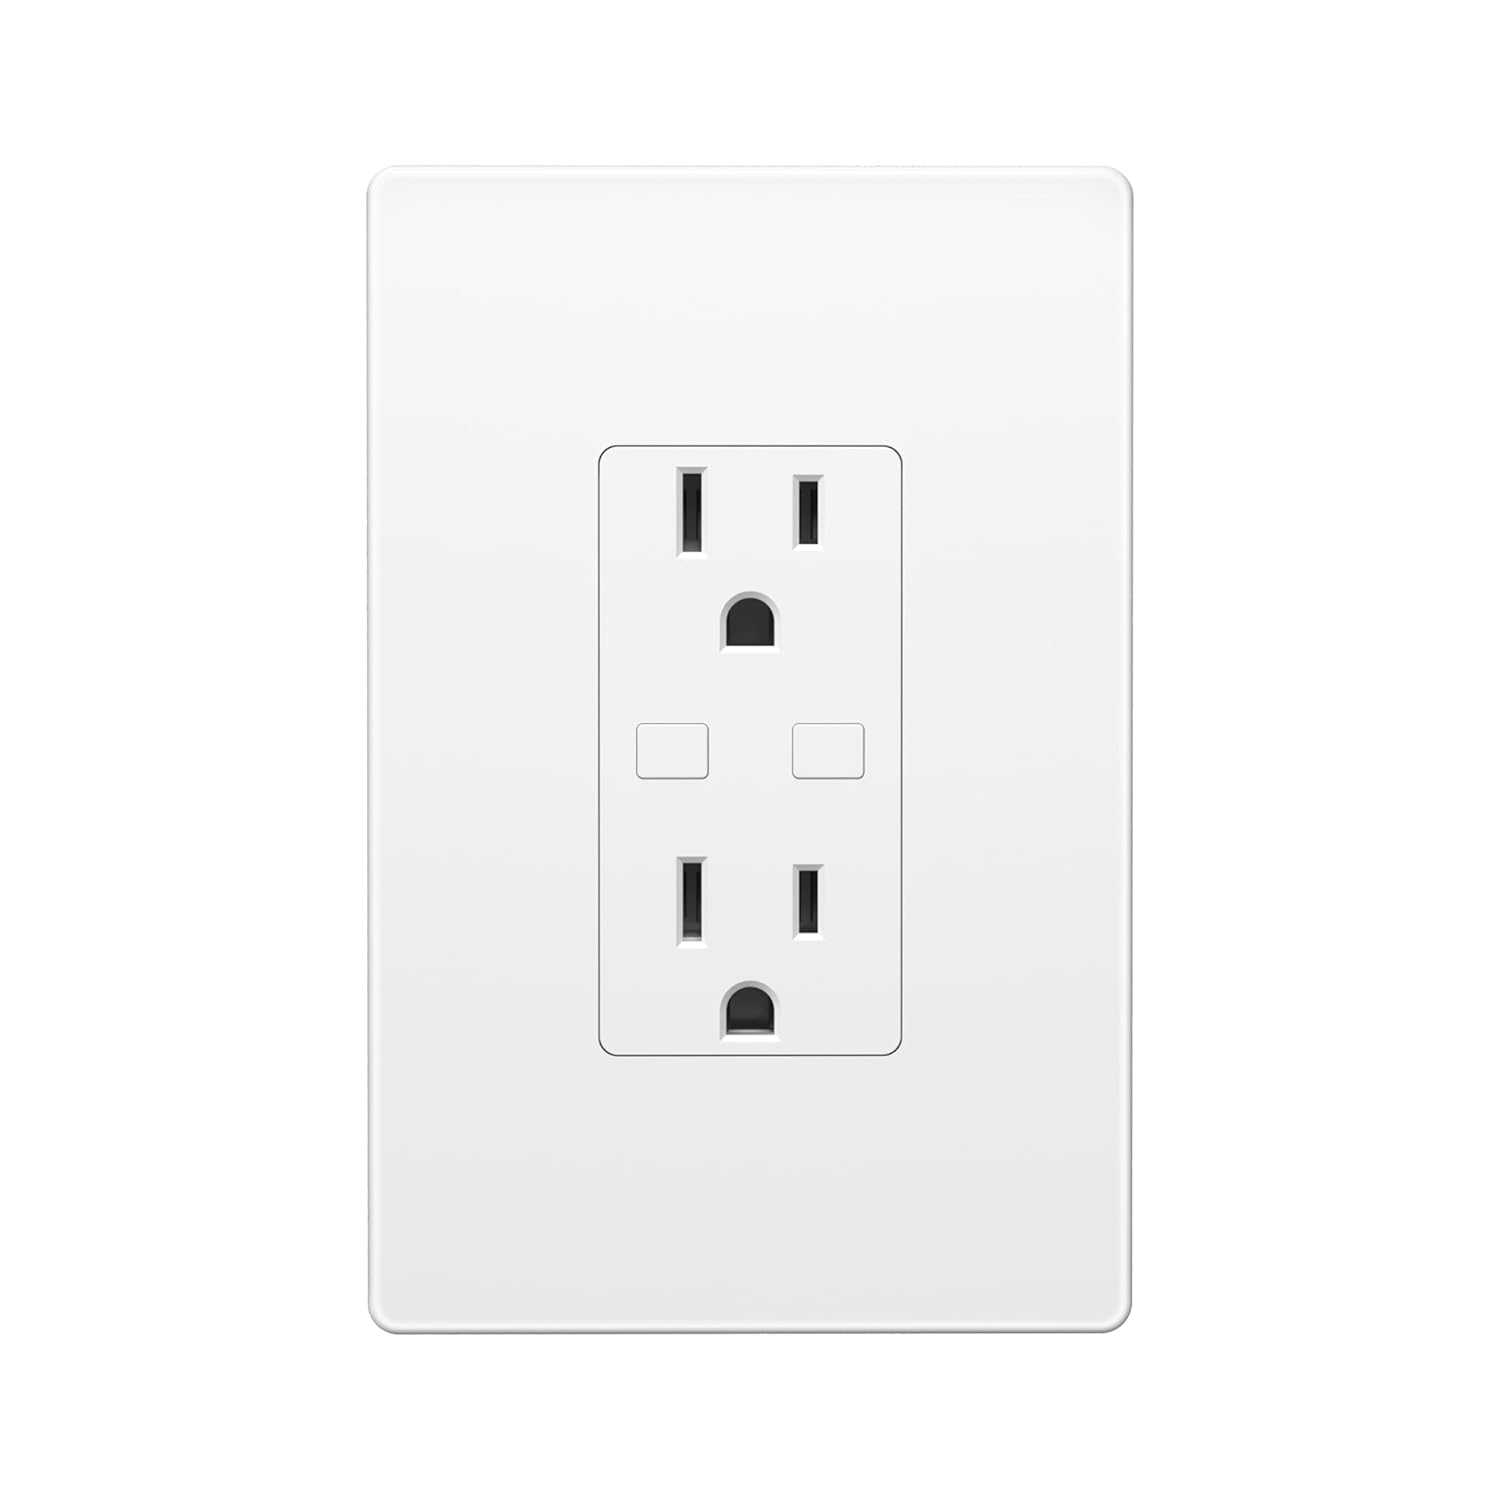 Smart WiFi in-Wall Outlet Switch 2 Individually Outlets Works with Timer Function Compatible with Alexa and Google Assistant  BN-LINK - BN-LINK